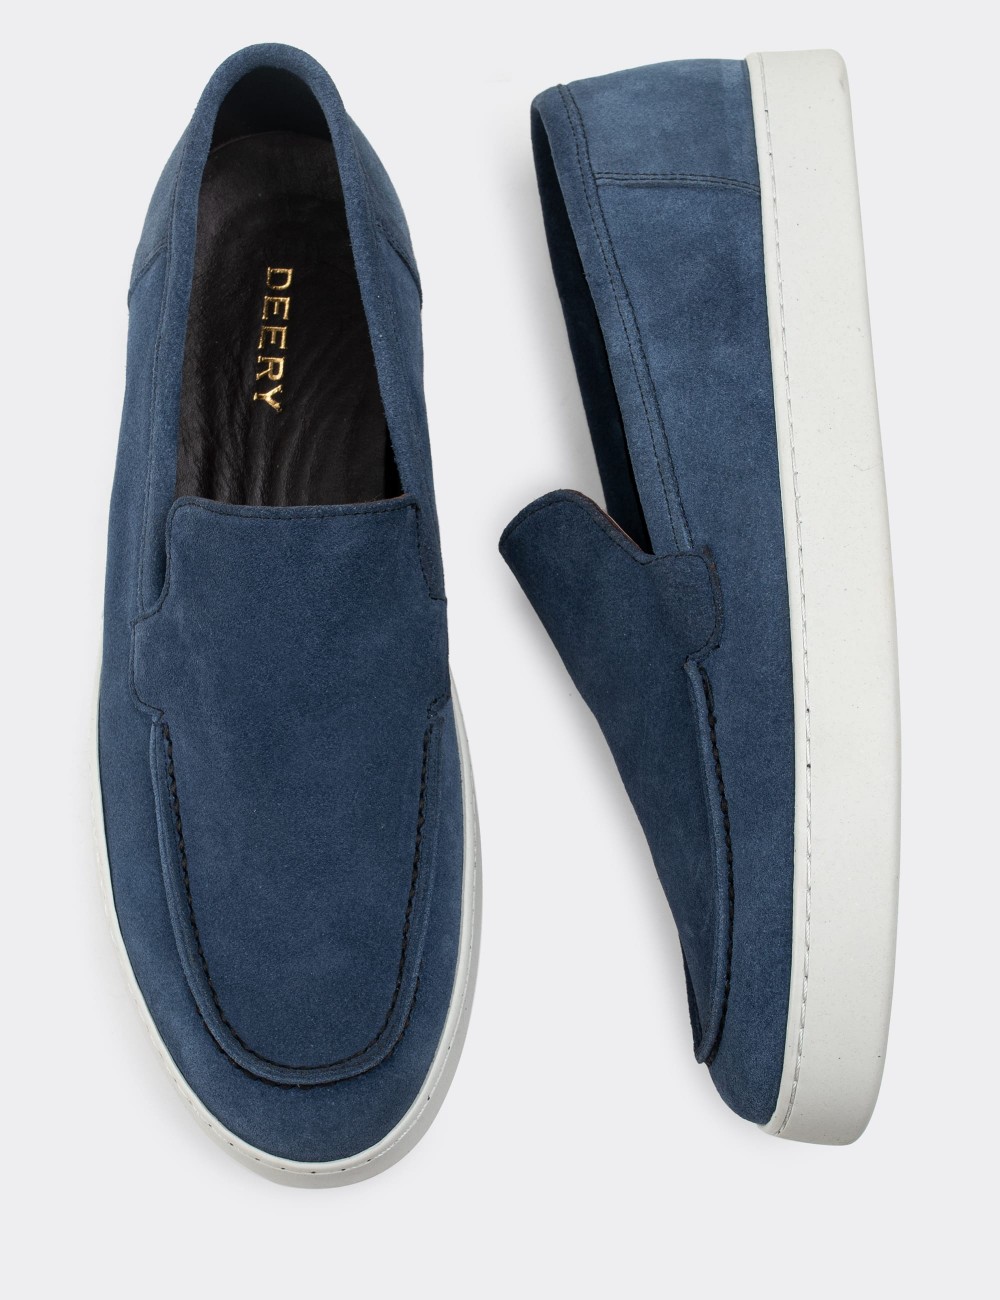 Blue Suede Leather Loafers - 01865MMVIC01